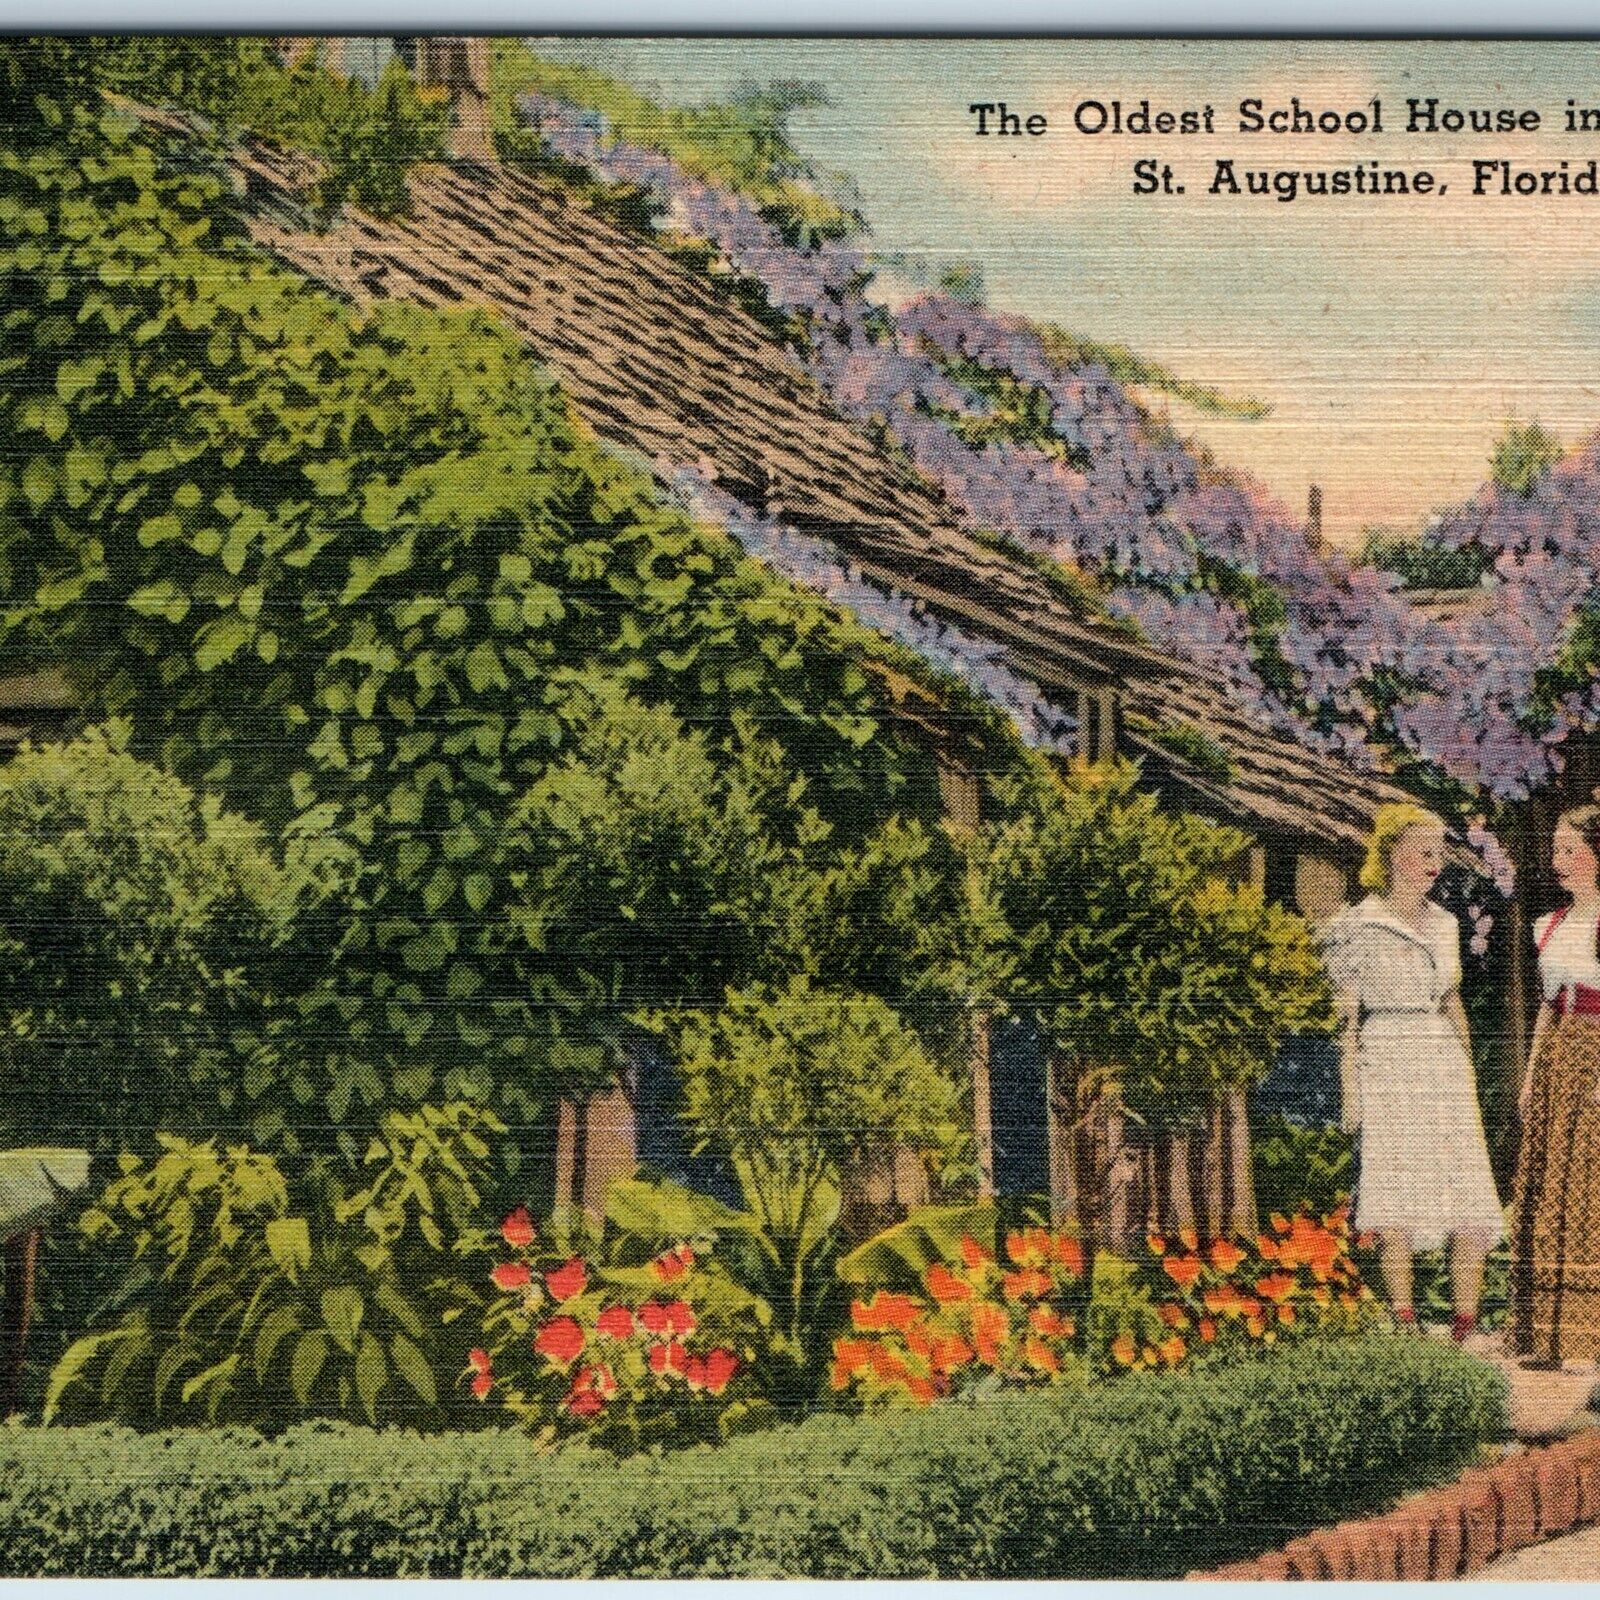 c1940s St. Augustine, Fla Oldest School House Cute Young Ladies Girls Linen A207